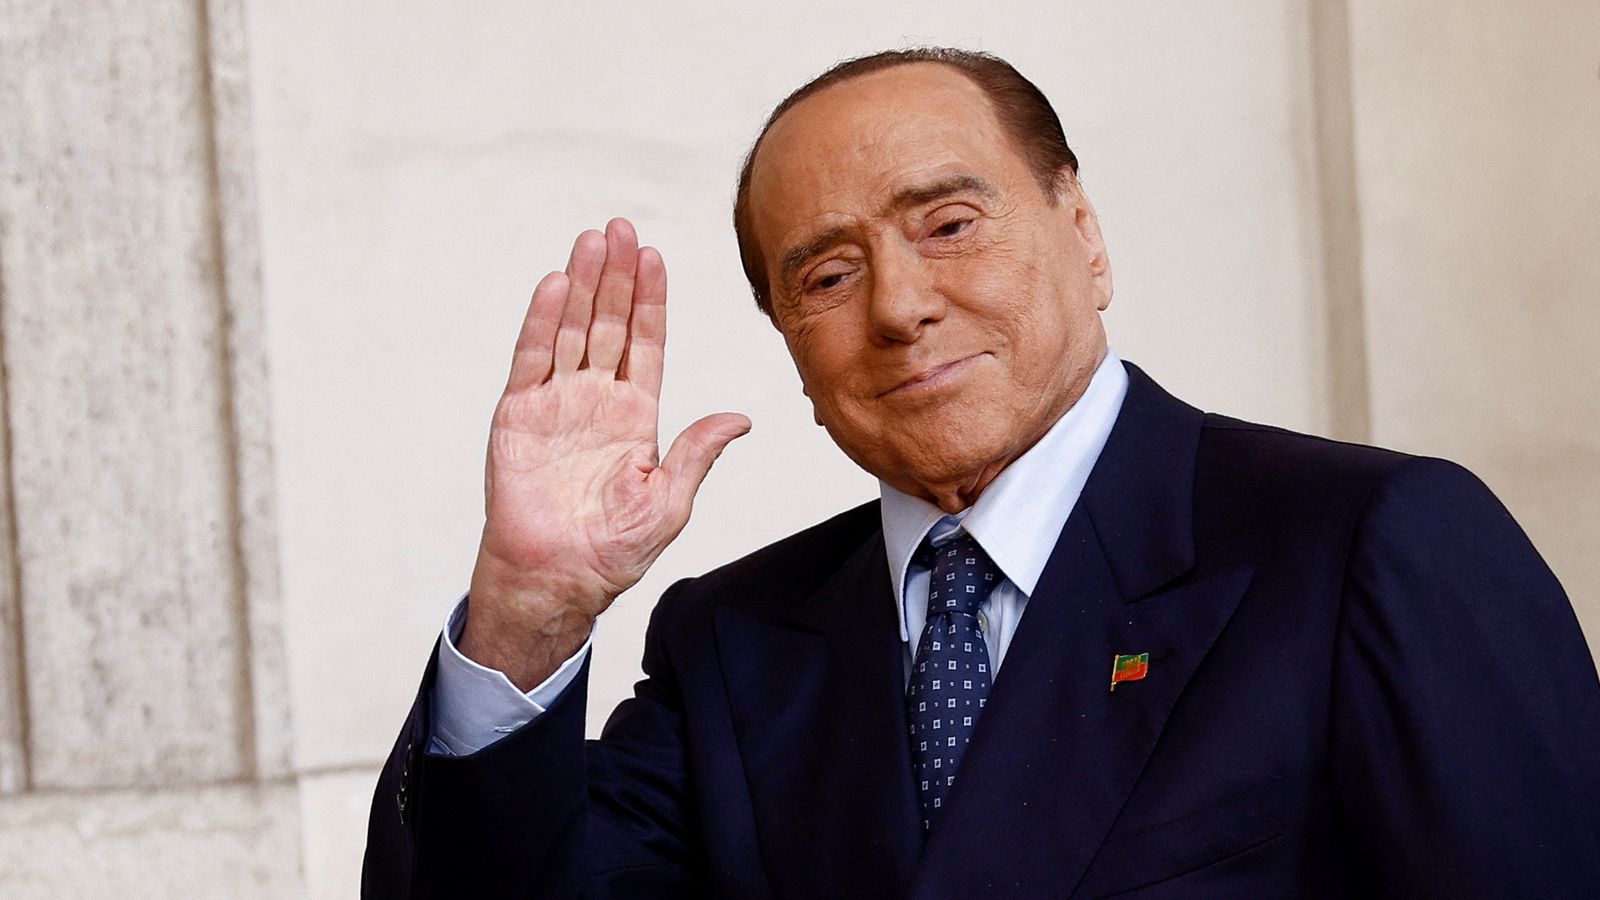 Silvio Berlusconi: 'Slight improvement' in former Italian PM's condition after being admitted to hospital with leukaemia